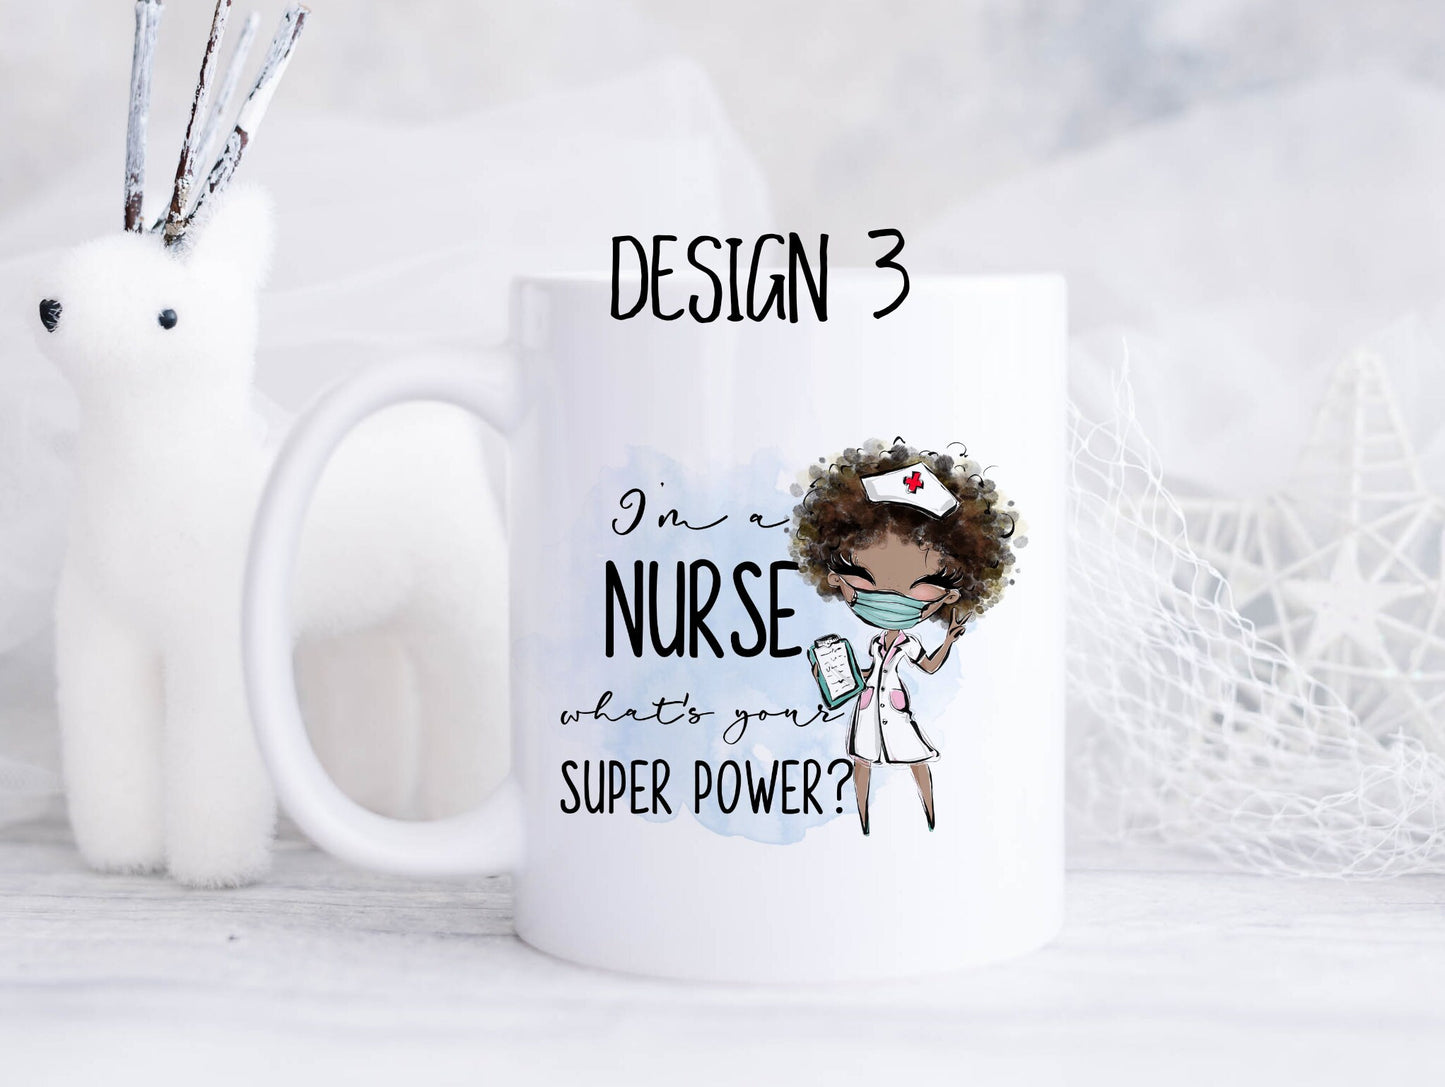 Ceramic mug featuring a nurse with brown curly hair and the text 'I'm a nurse, what's your superpower?'